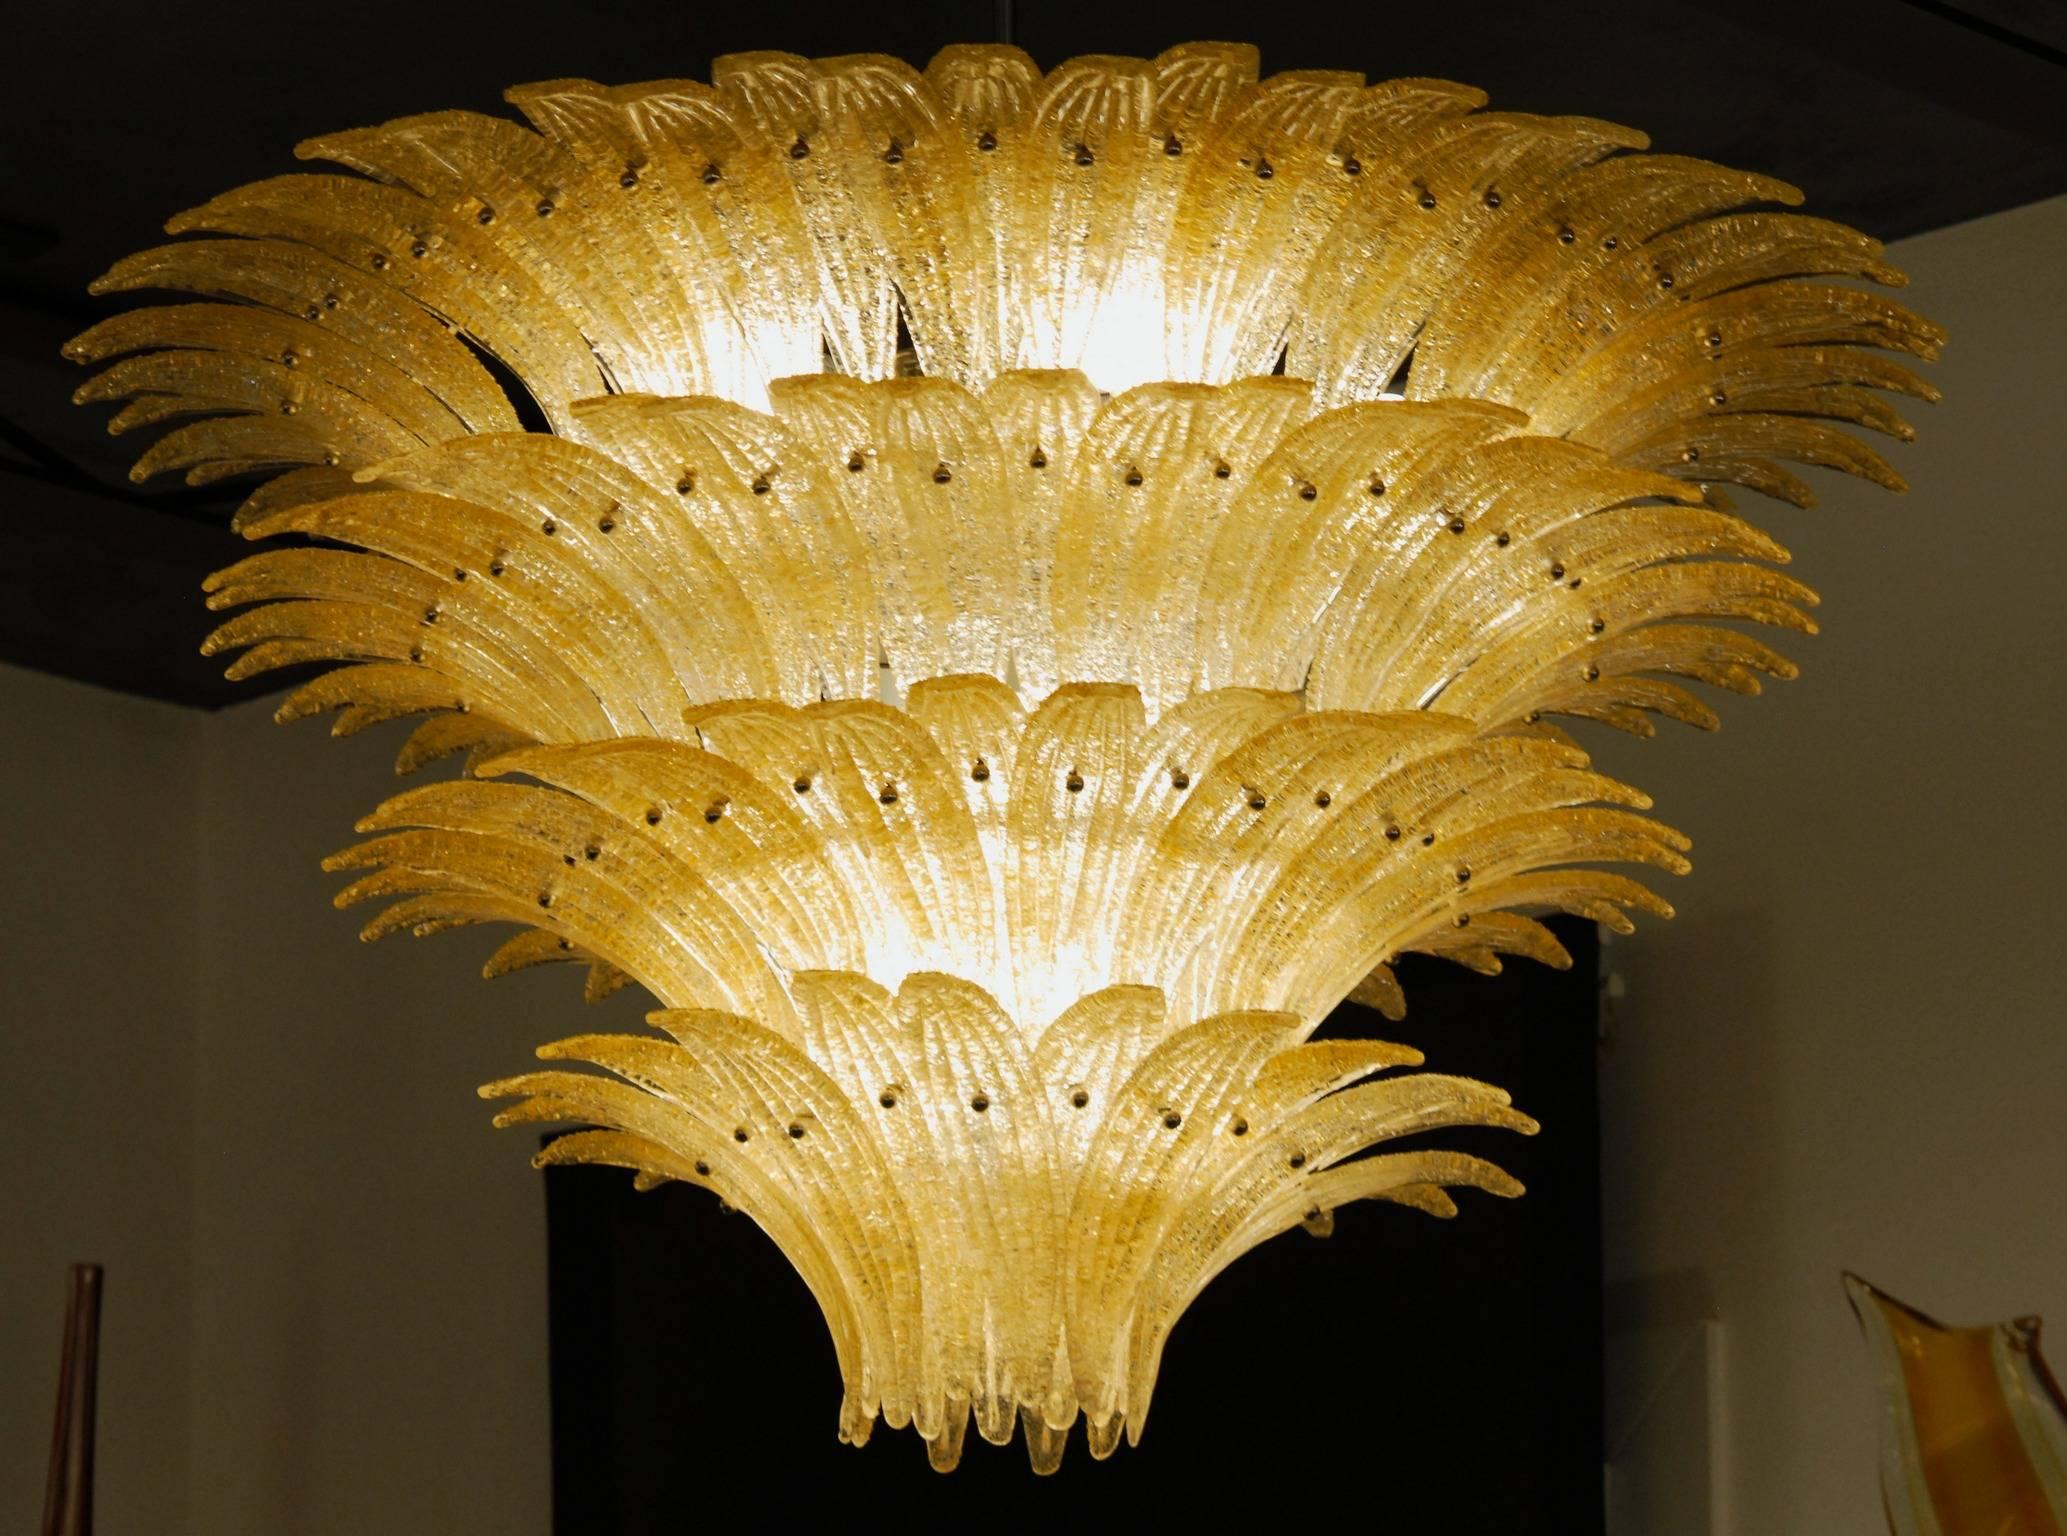 Monumental Mid-Century chandelier. For Classic and eclectic homes and halls.

Would also be stunning in public places. The gold tone achieved with the amber application enriches an already beautiful design. The palm leaves are dense and cover the